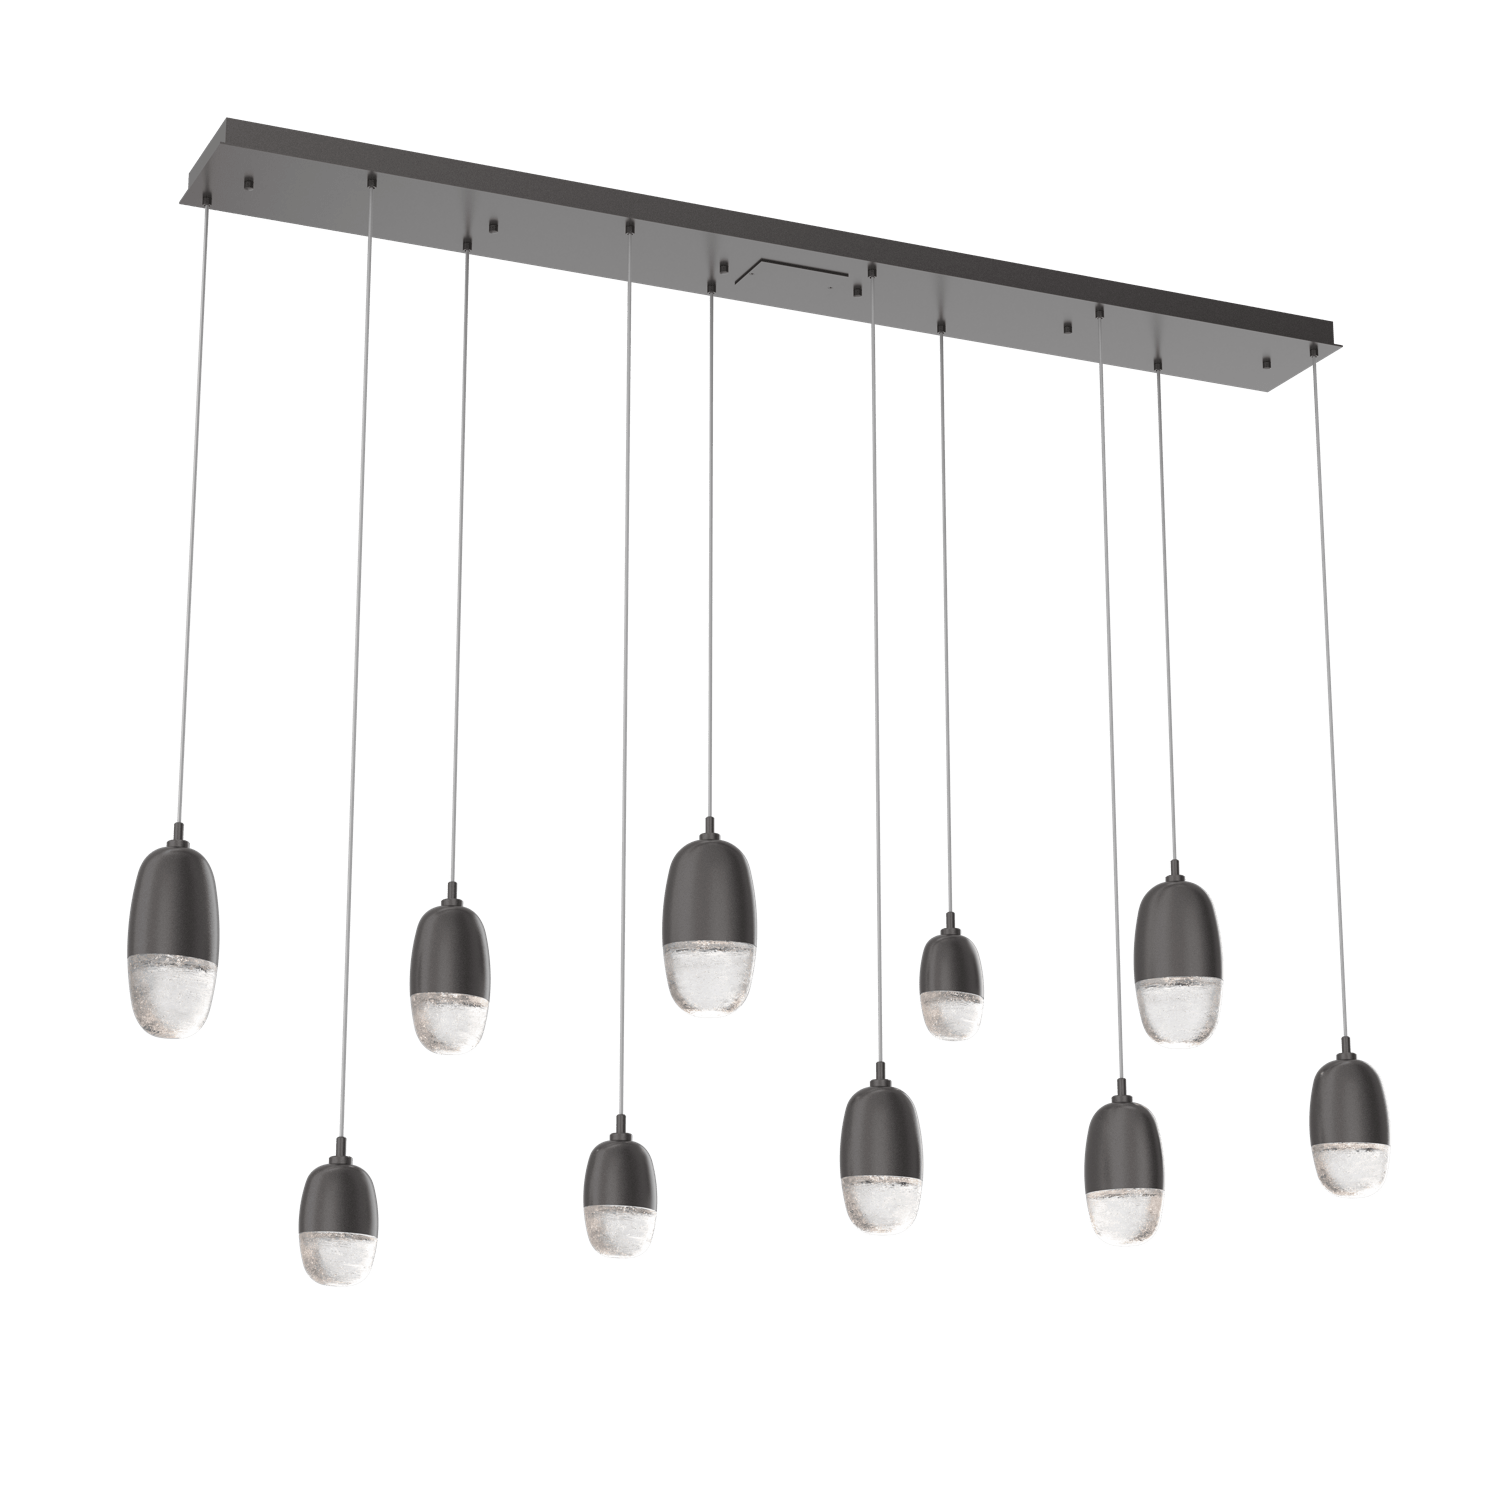 PLB0079-09-GP-Hammerton-Studio-Pebble-9-light-linear-pendant-chandelier-with-graphite-finish-and-clear-cast-glass-shades-and-LED-lamping